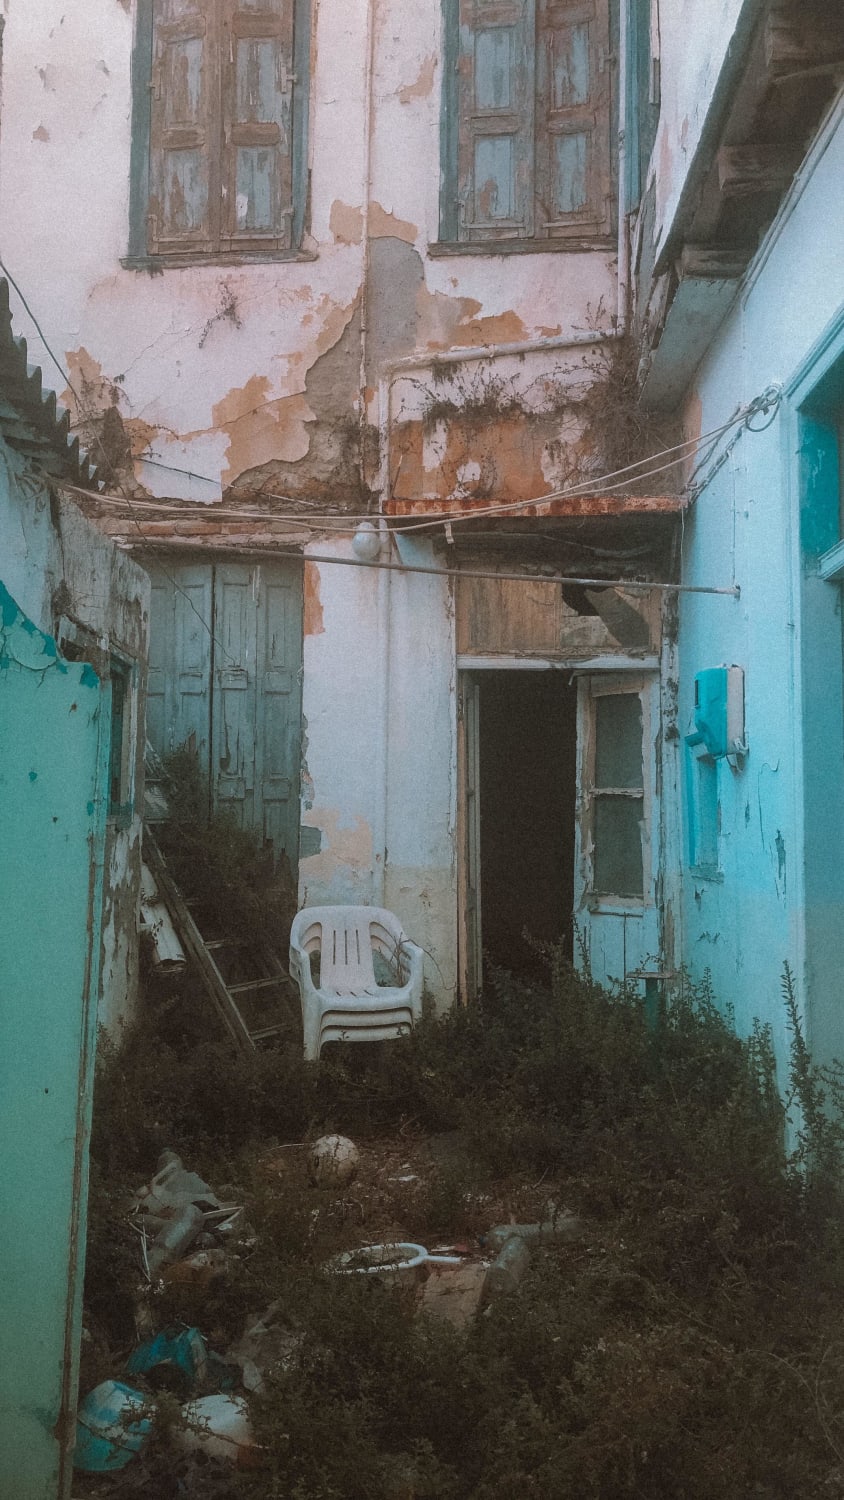 courtyard of an abandoned apartment in Iraklion Crete (might have to click to see the full image)